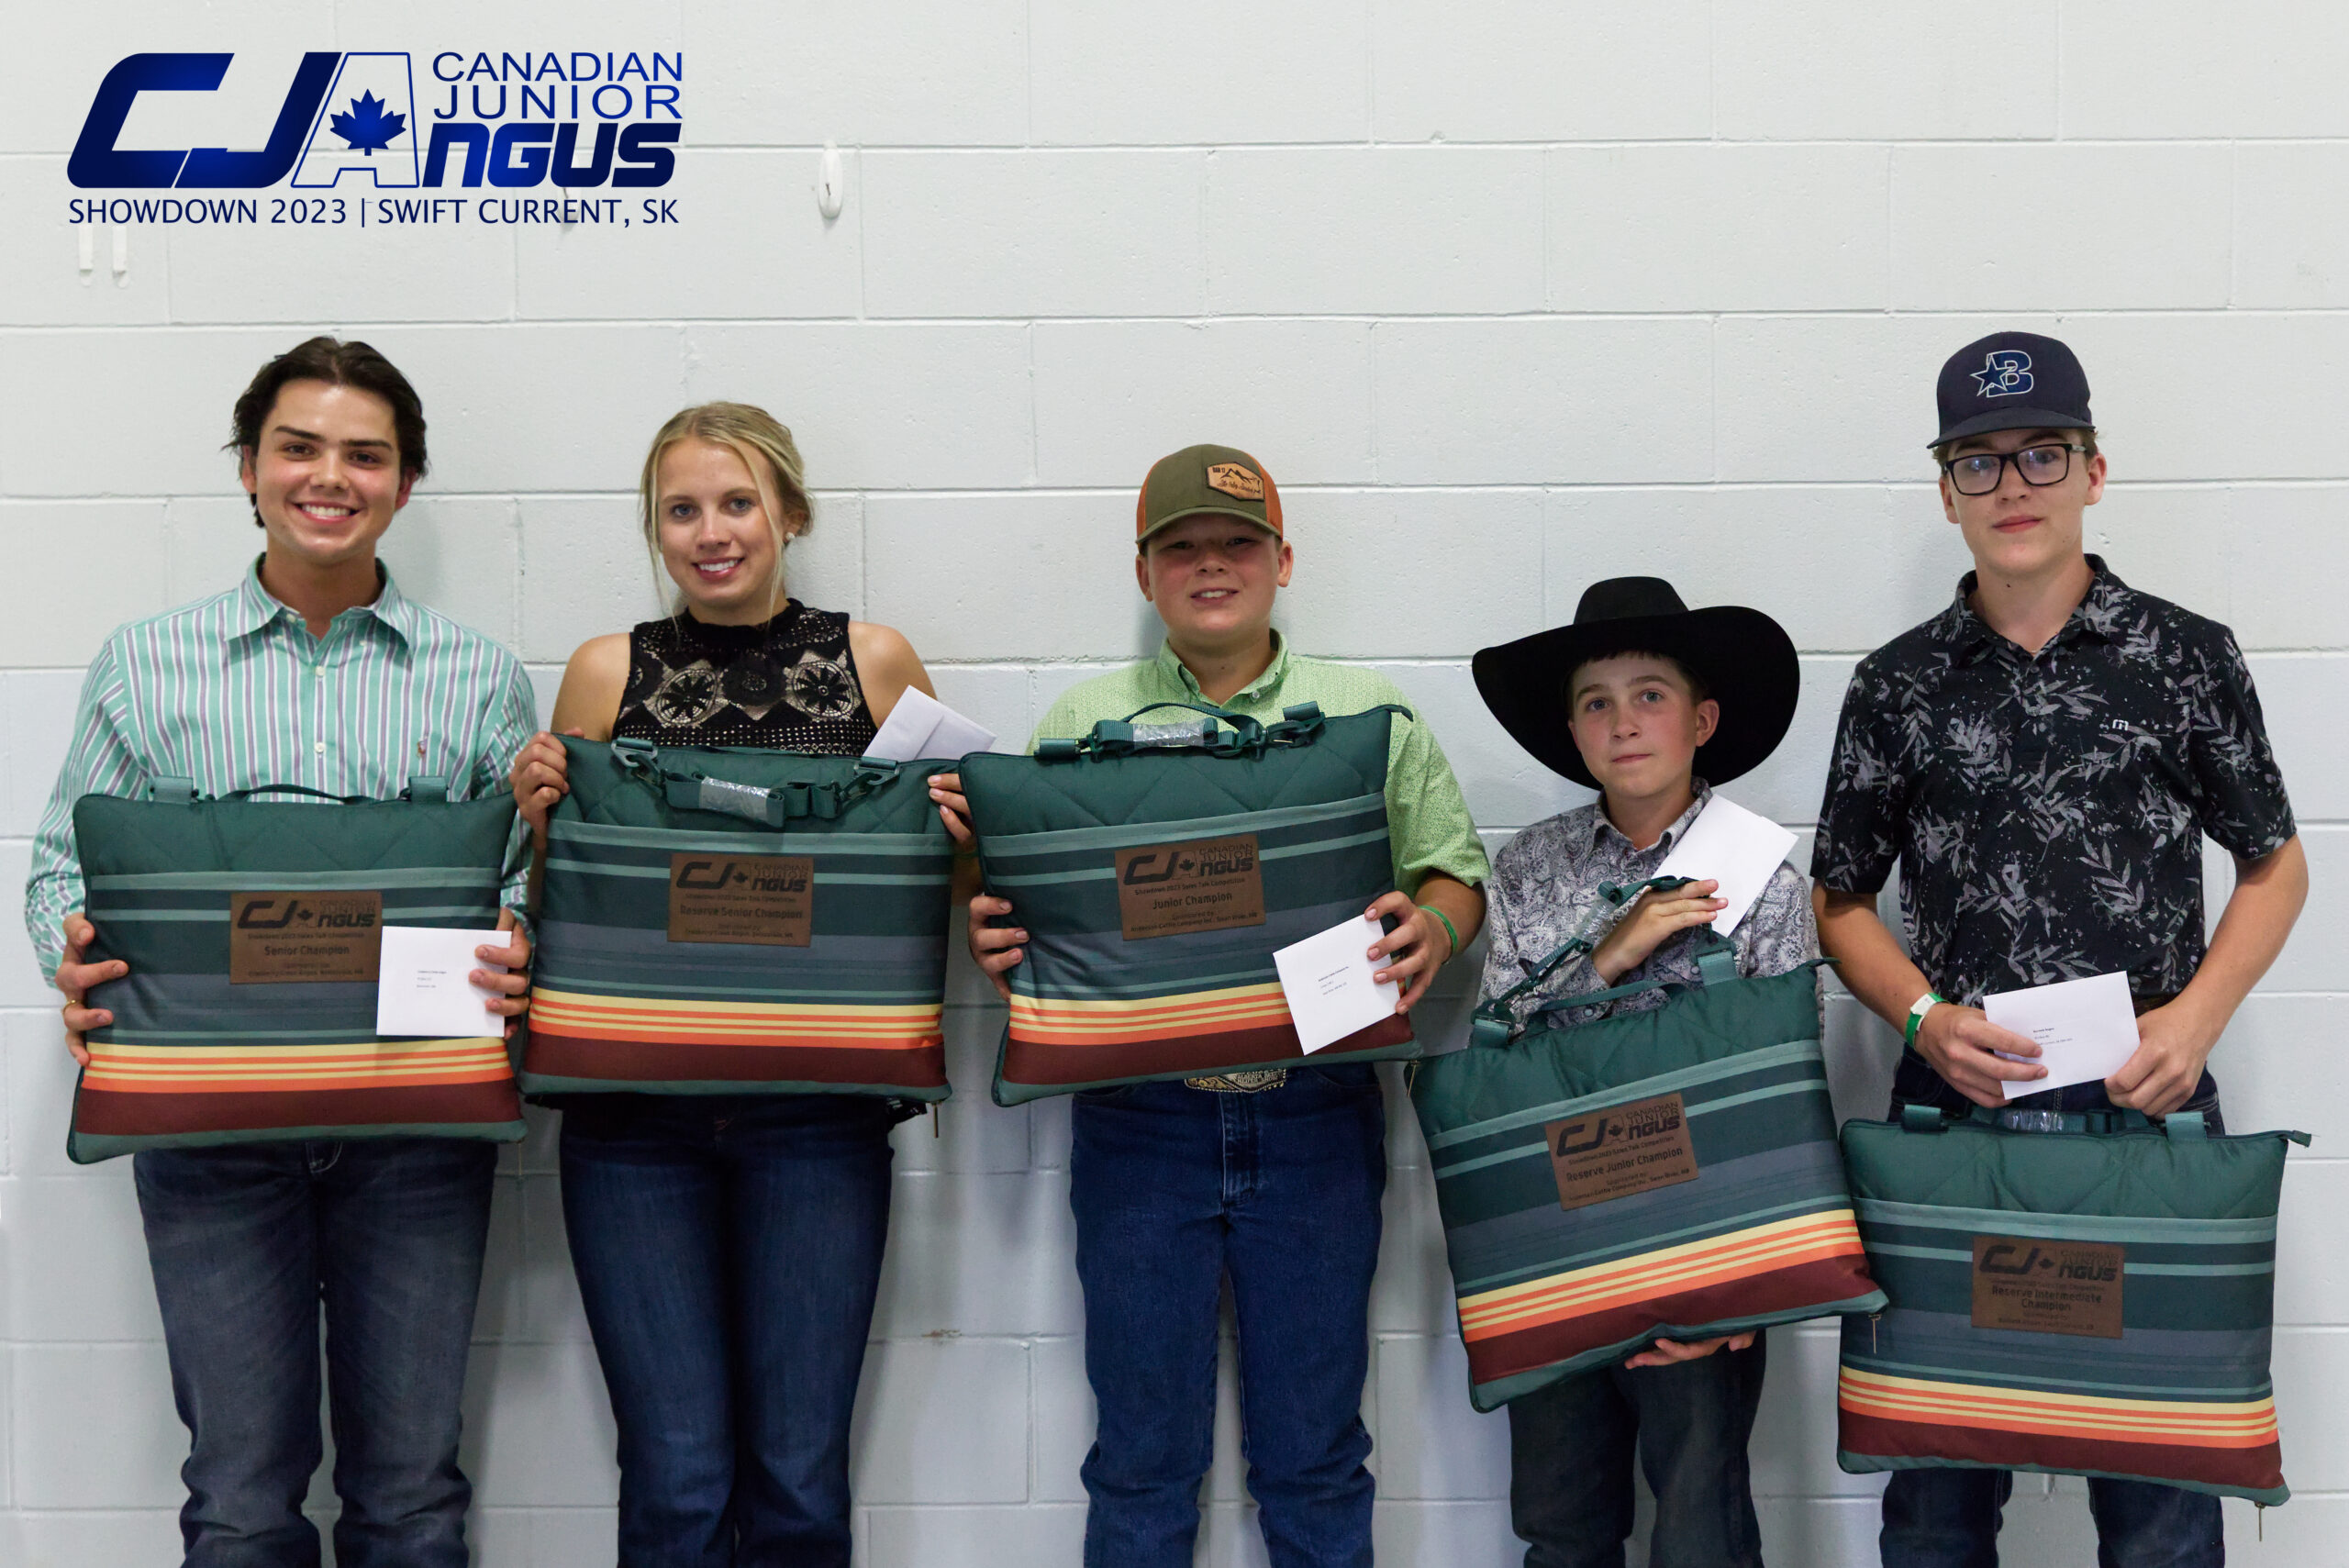 From Left to Right: Senior Sales Talk Champion: Baxter Blair, Reserve Sales Talk Champion: Keely Adams, Junior Sales Talk Champion: Daniel Pierson, Reserve Junior Sales Talk Champion: Colt Needham, Reserve Intermediate Sales Talk Champion: Landon Brandl, Intermediate Sales Talk Champion: Lane Steen (not pictured)